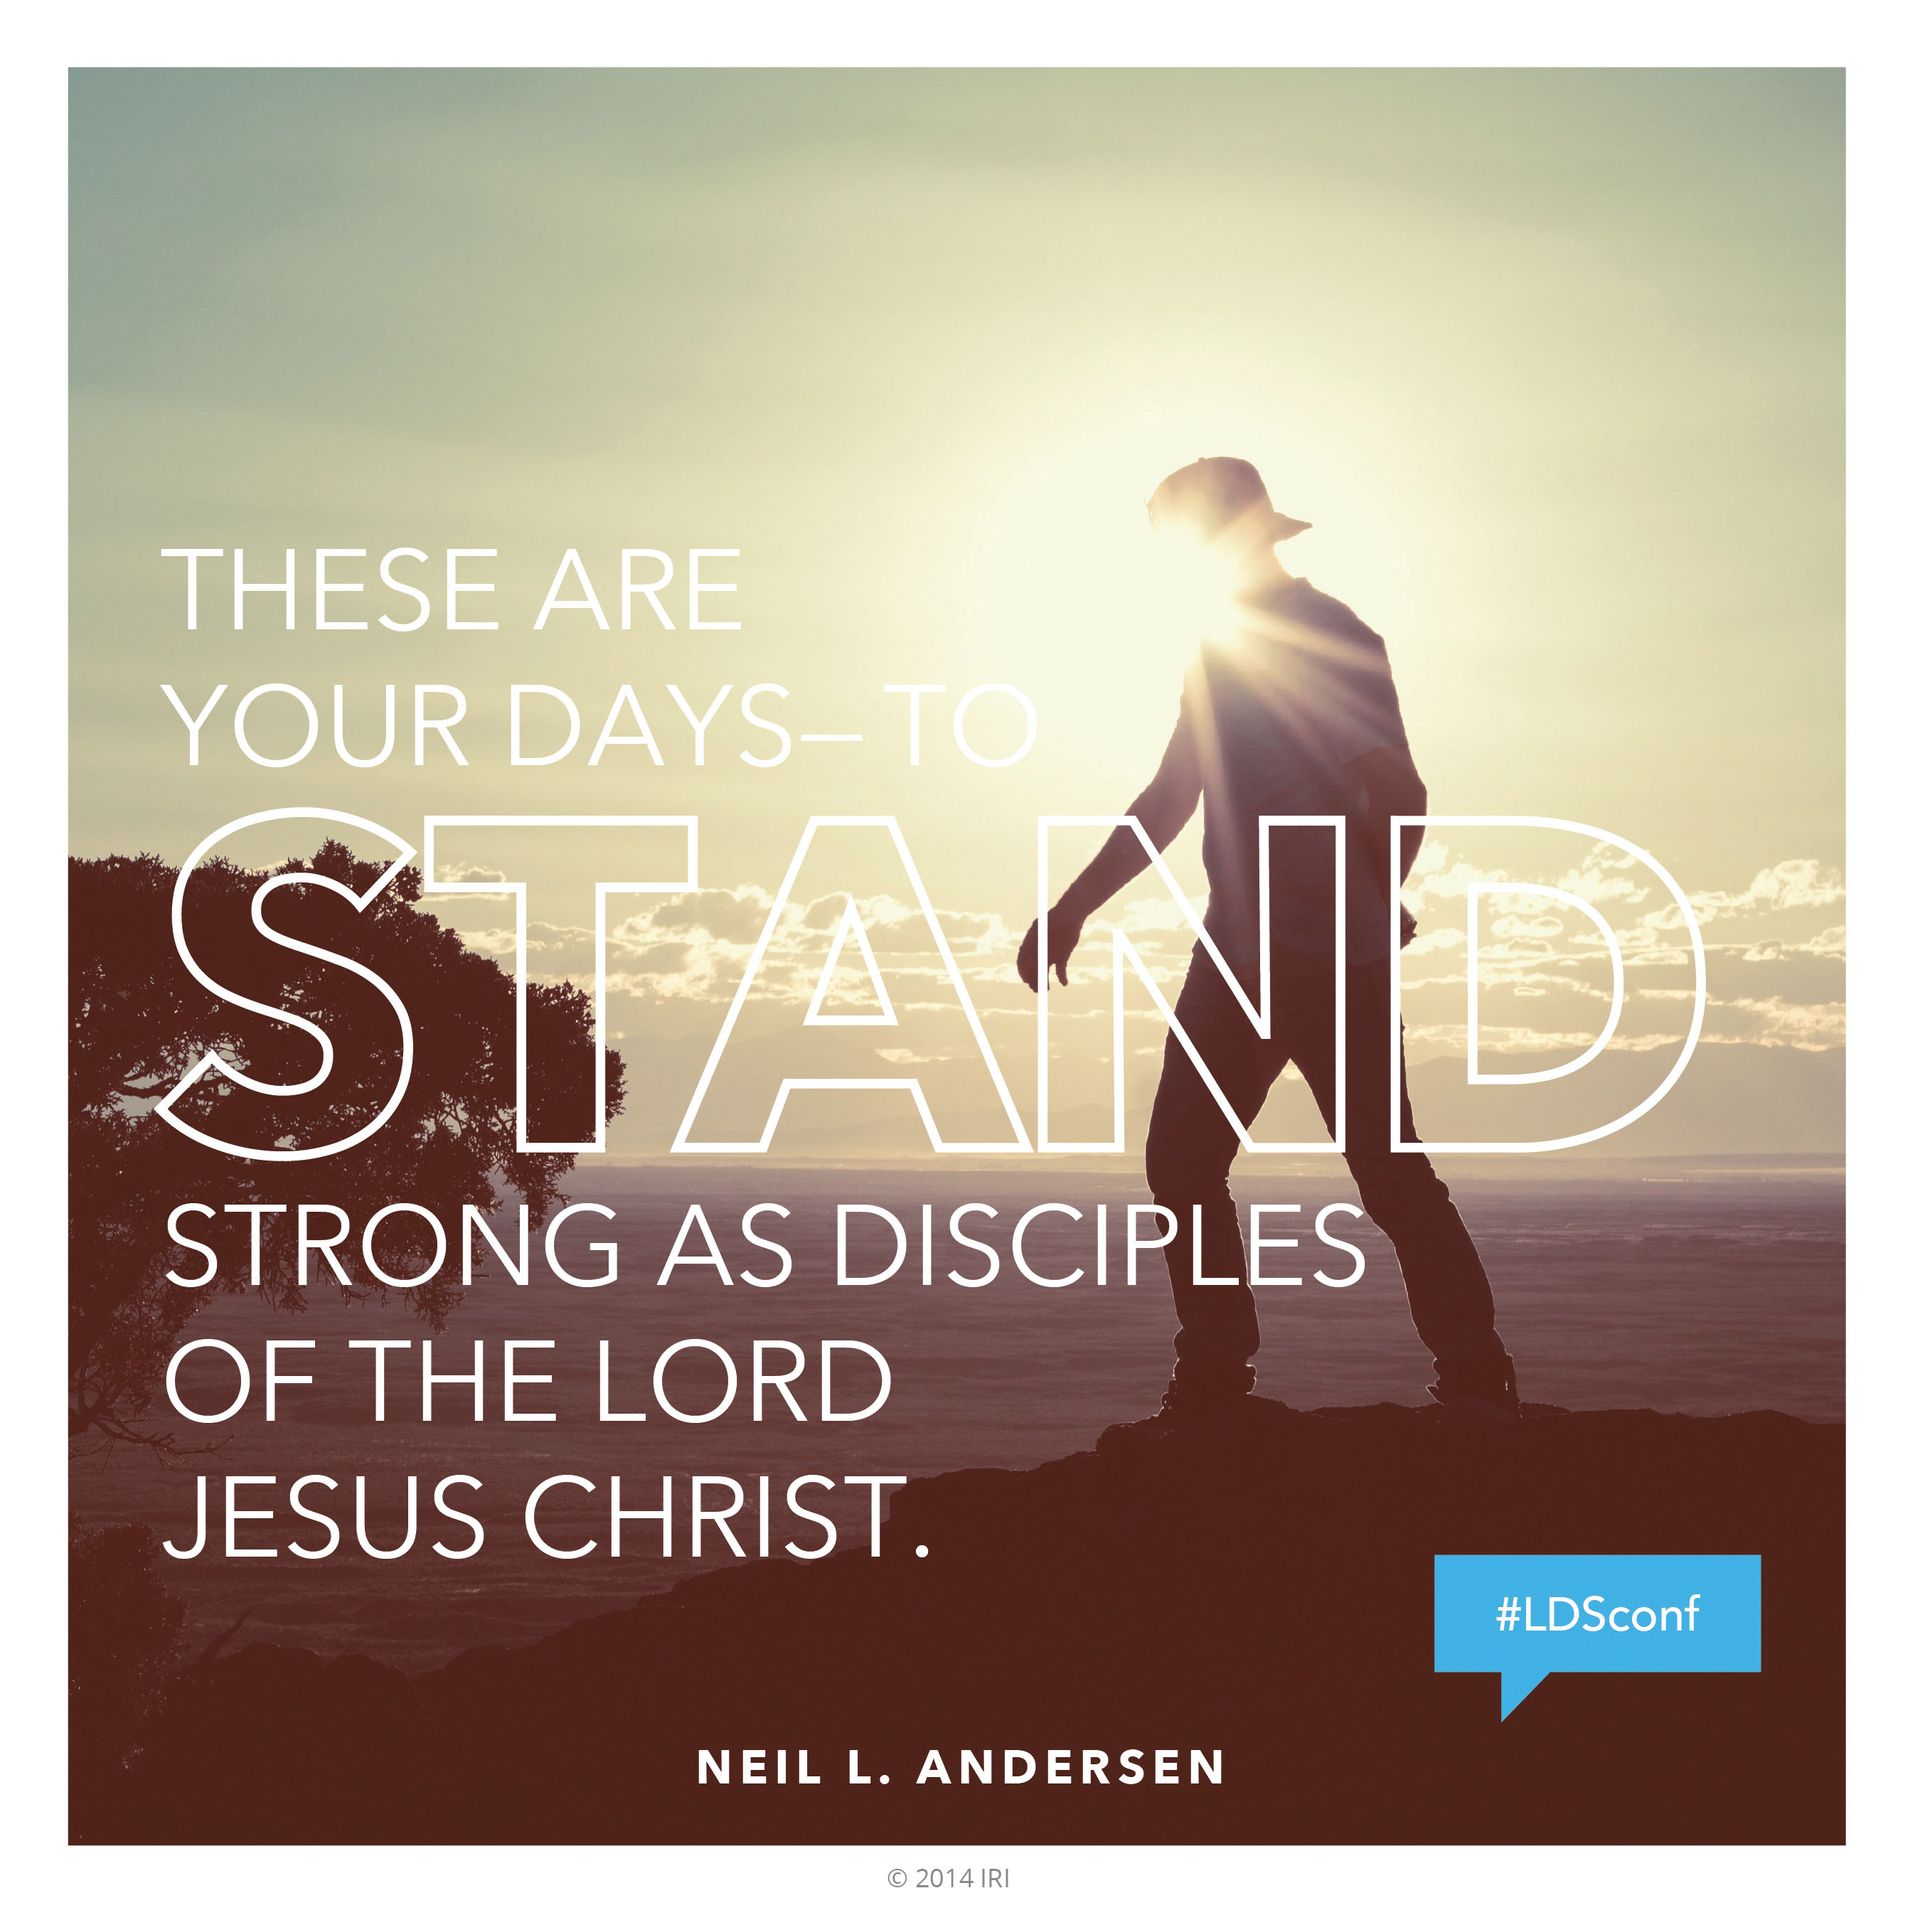 “These are your days—to stand strong as disciples of the Lord Jesus Christ.”—Elder Neil L. Andersen, “Spiritual Whirlwinds”